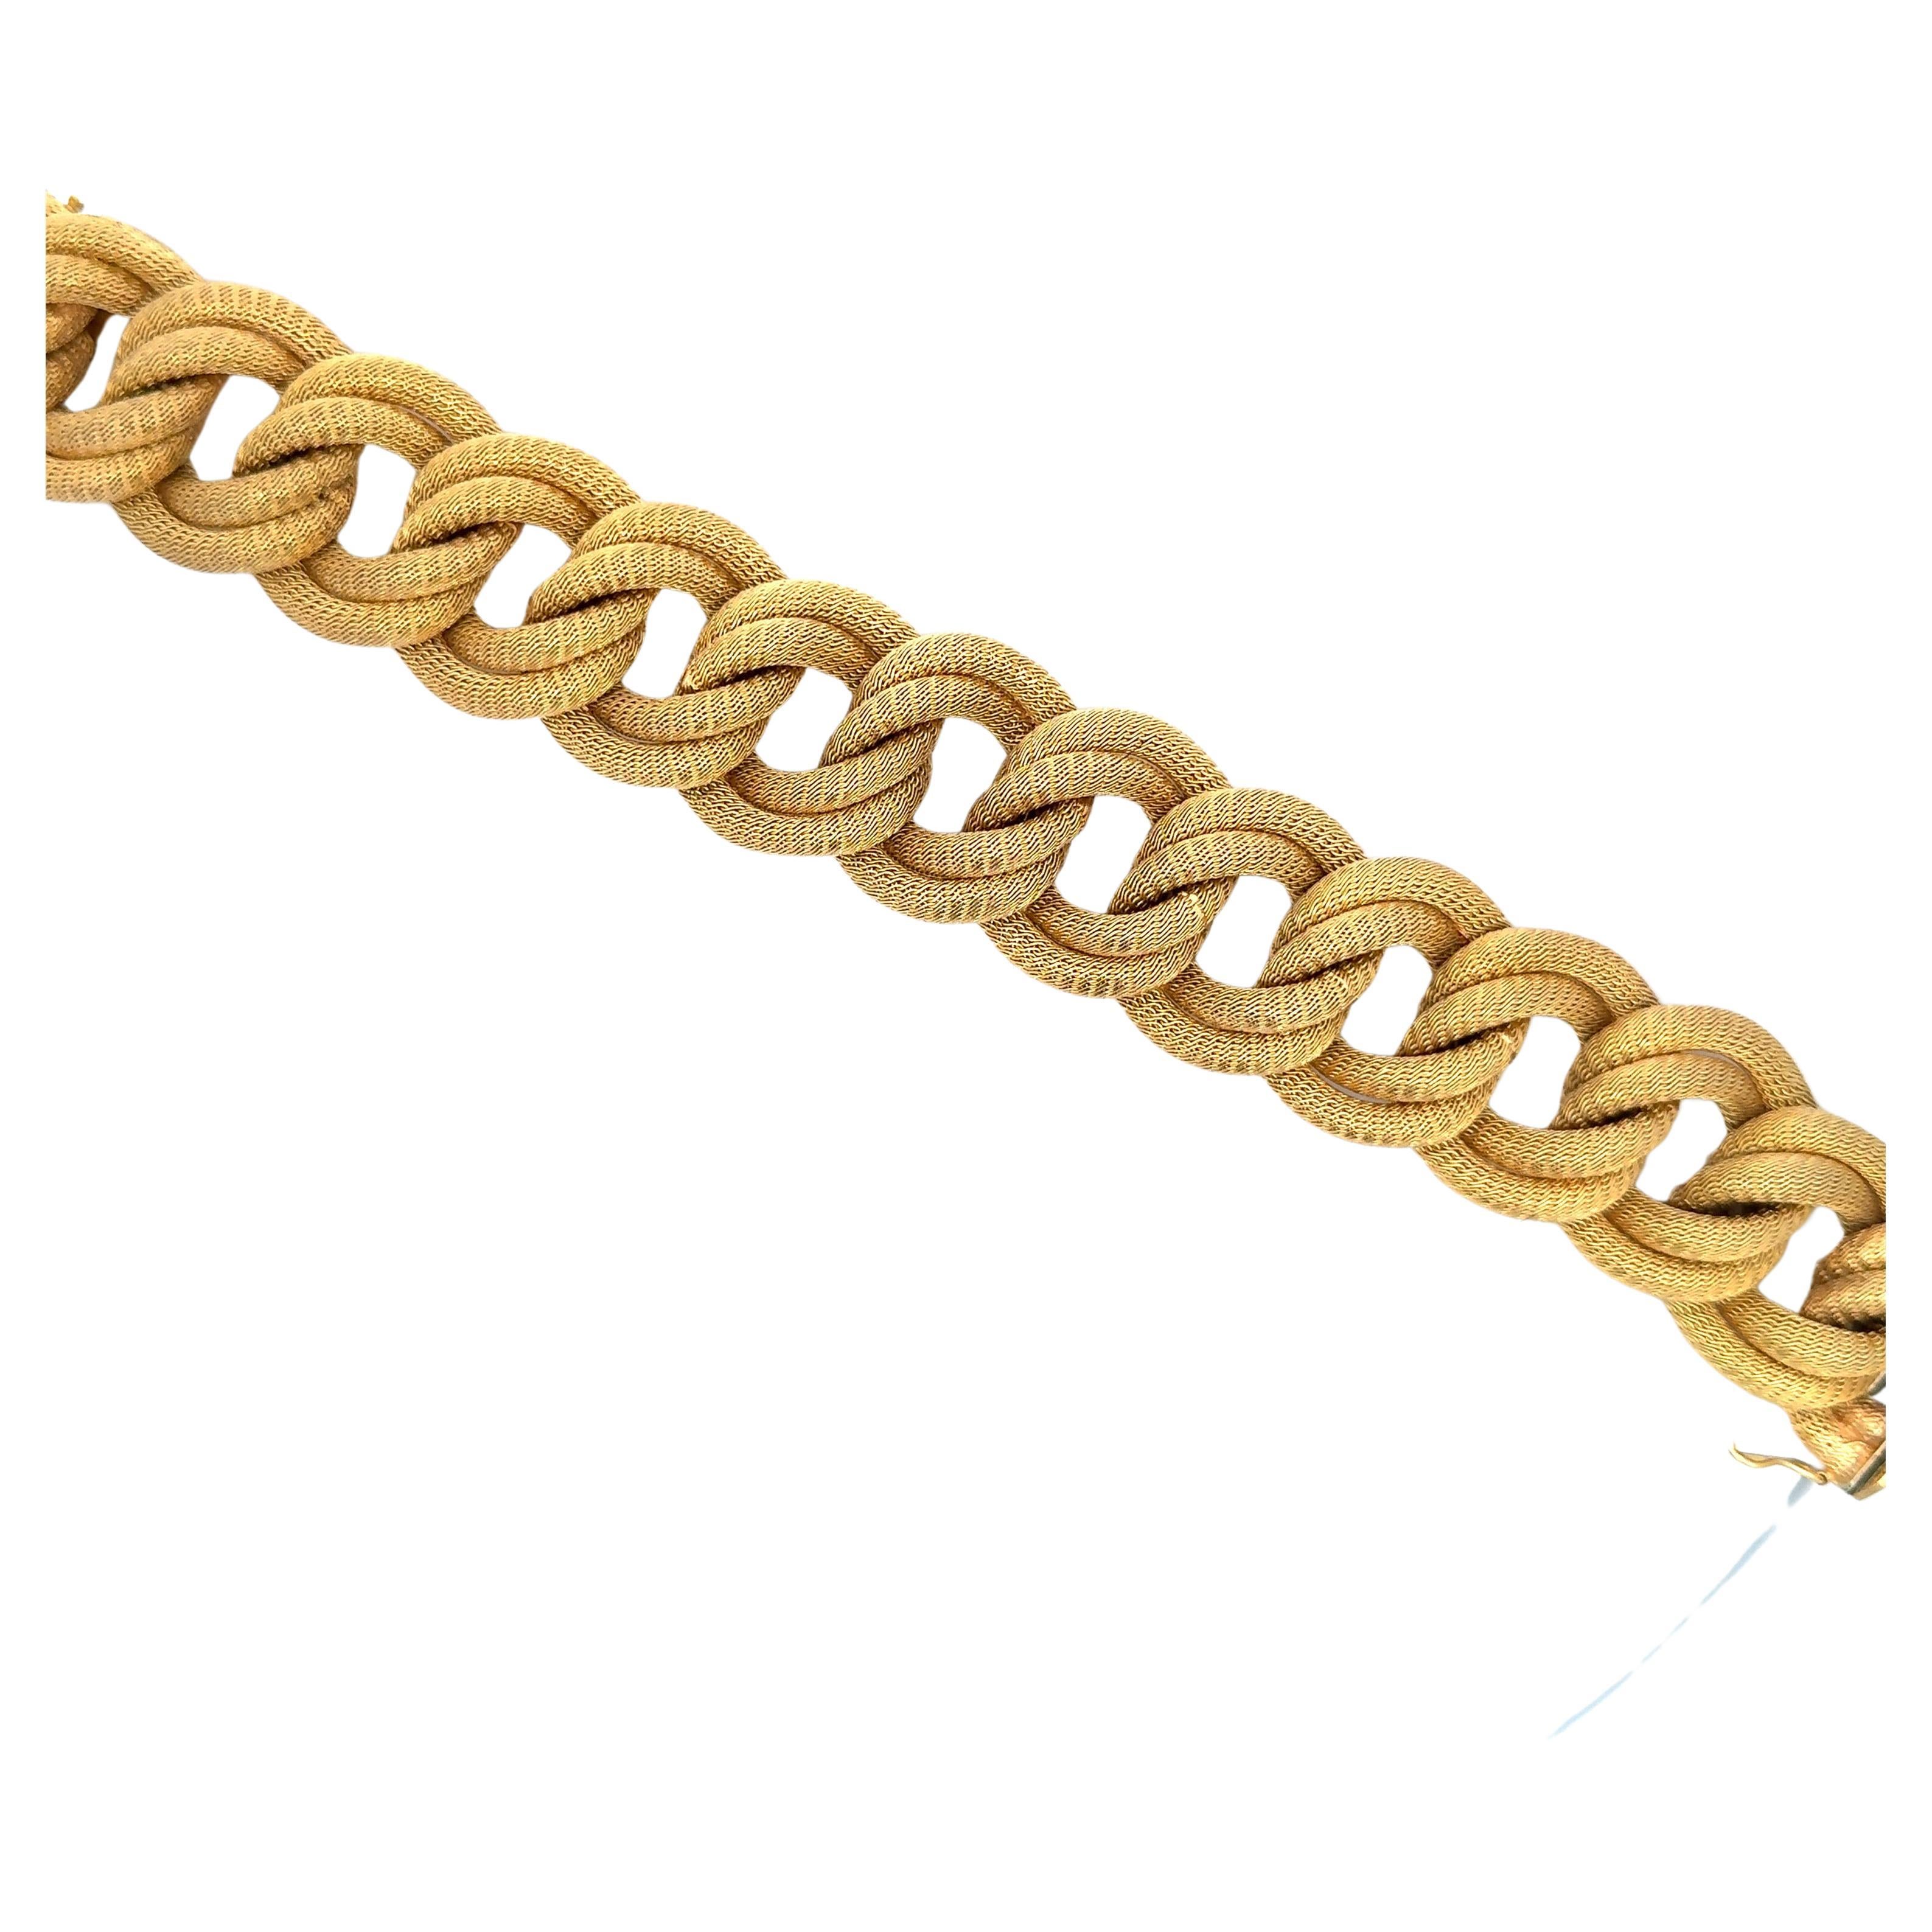 Wide woven motif bracelet featuring 14 double links weighing 104.9 grams in 18 karat yellow gold. 
Very comfortable on the wrist.